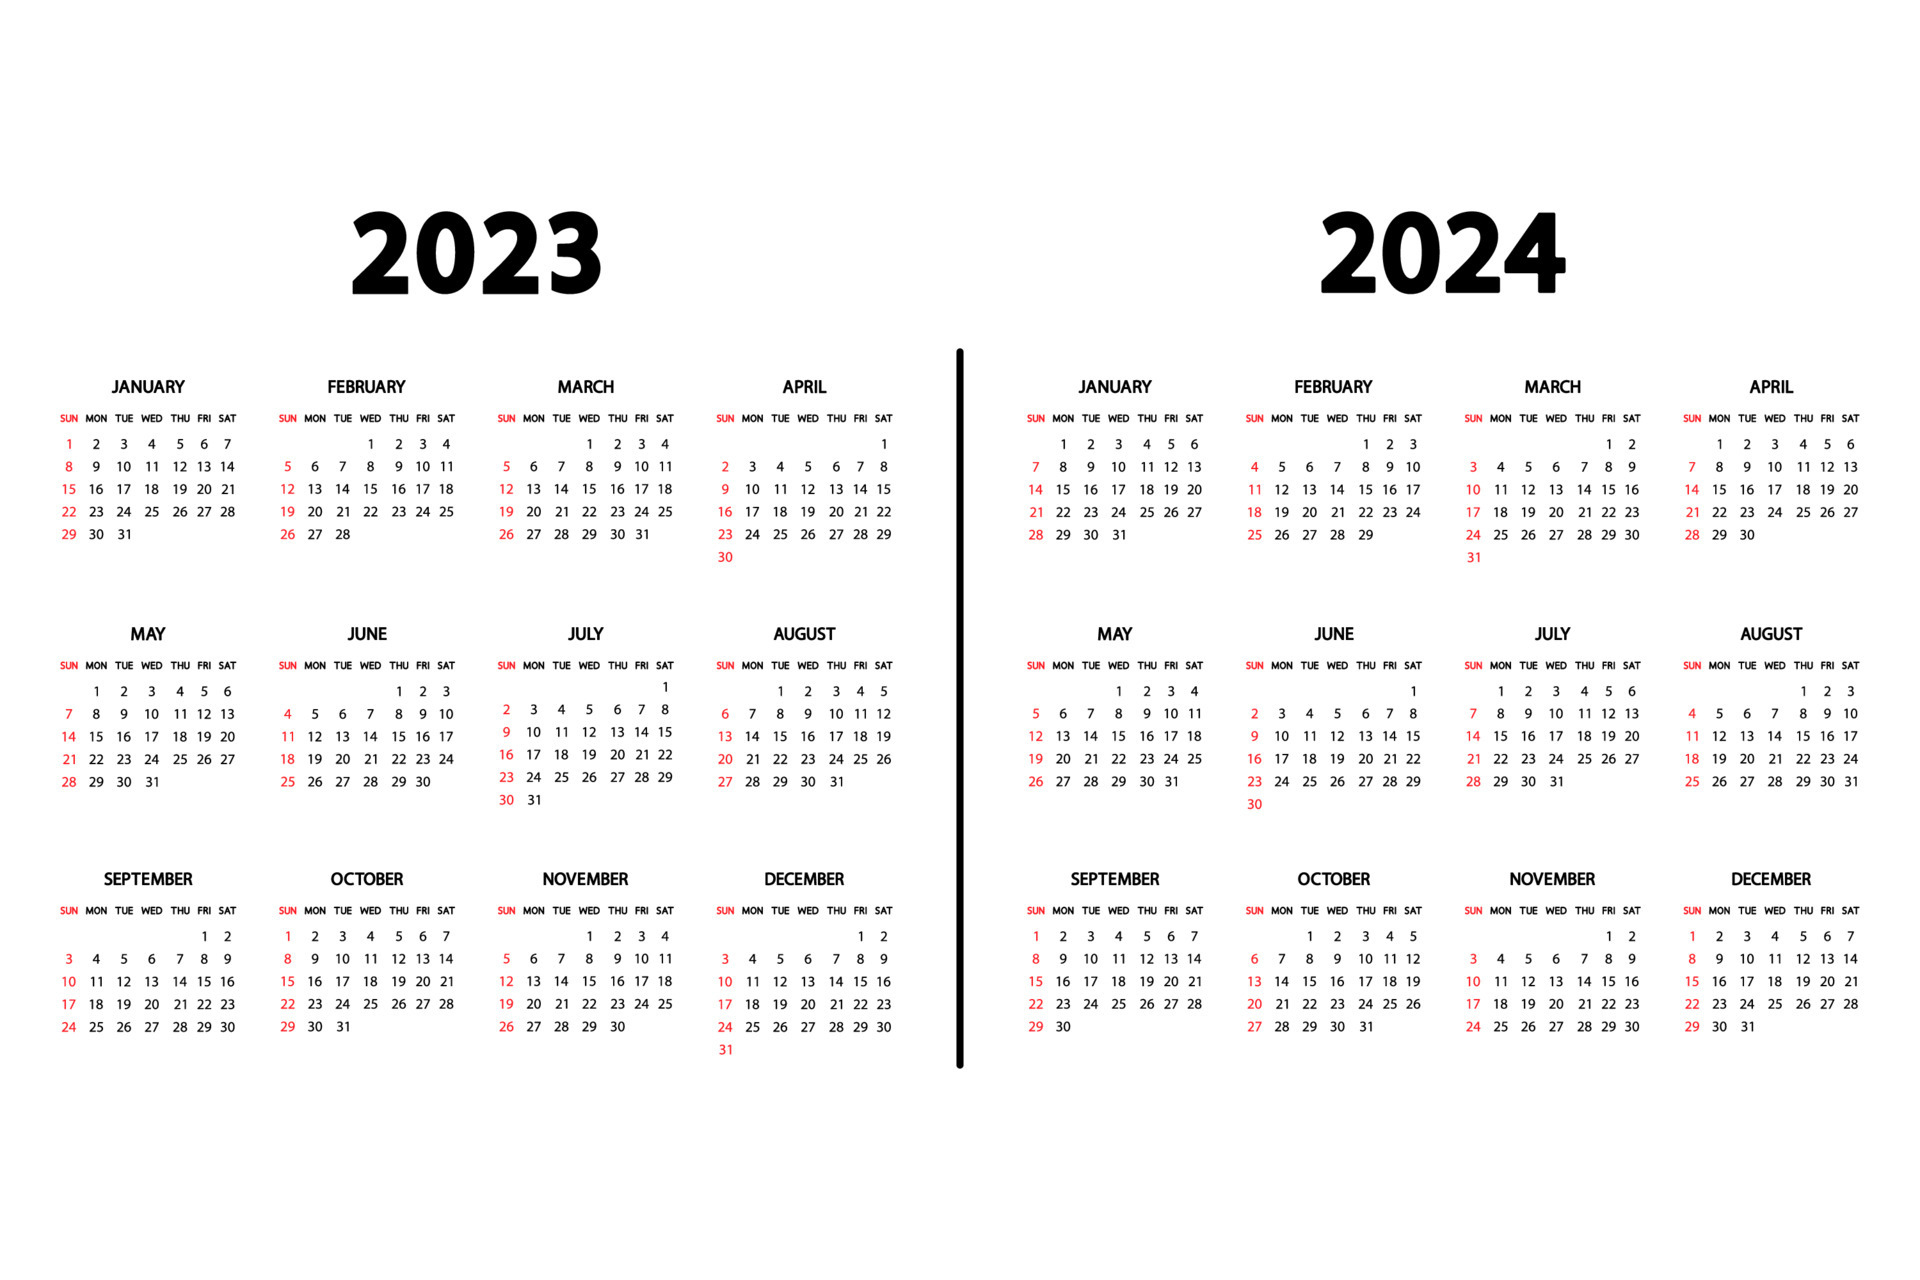 Calendar English 2023 And 2024 Years. The Week Starts Sunday | Yearly Calendar 2023 And 2024